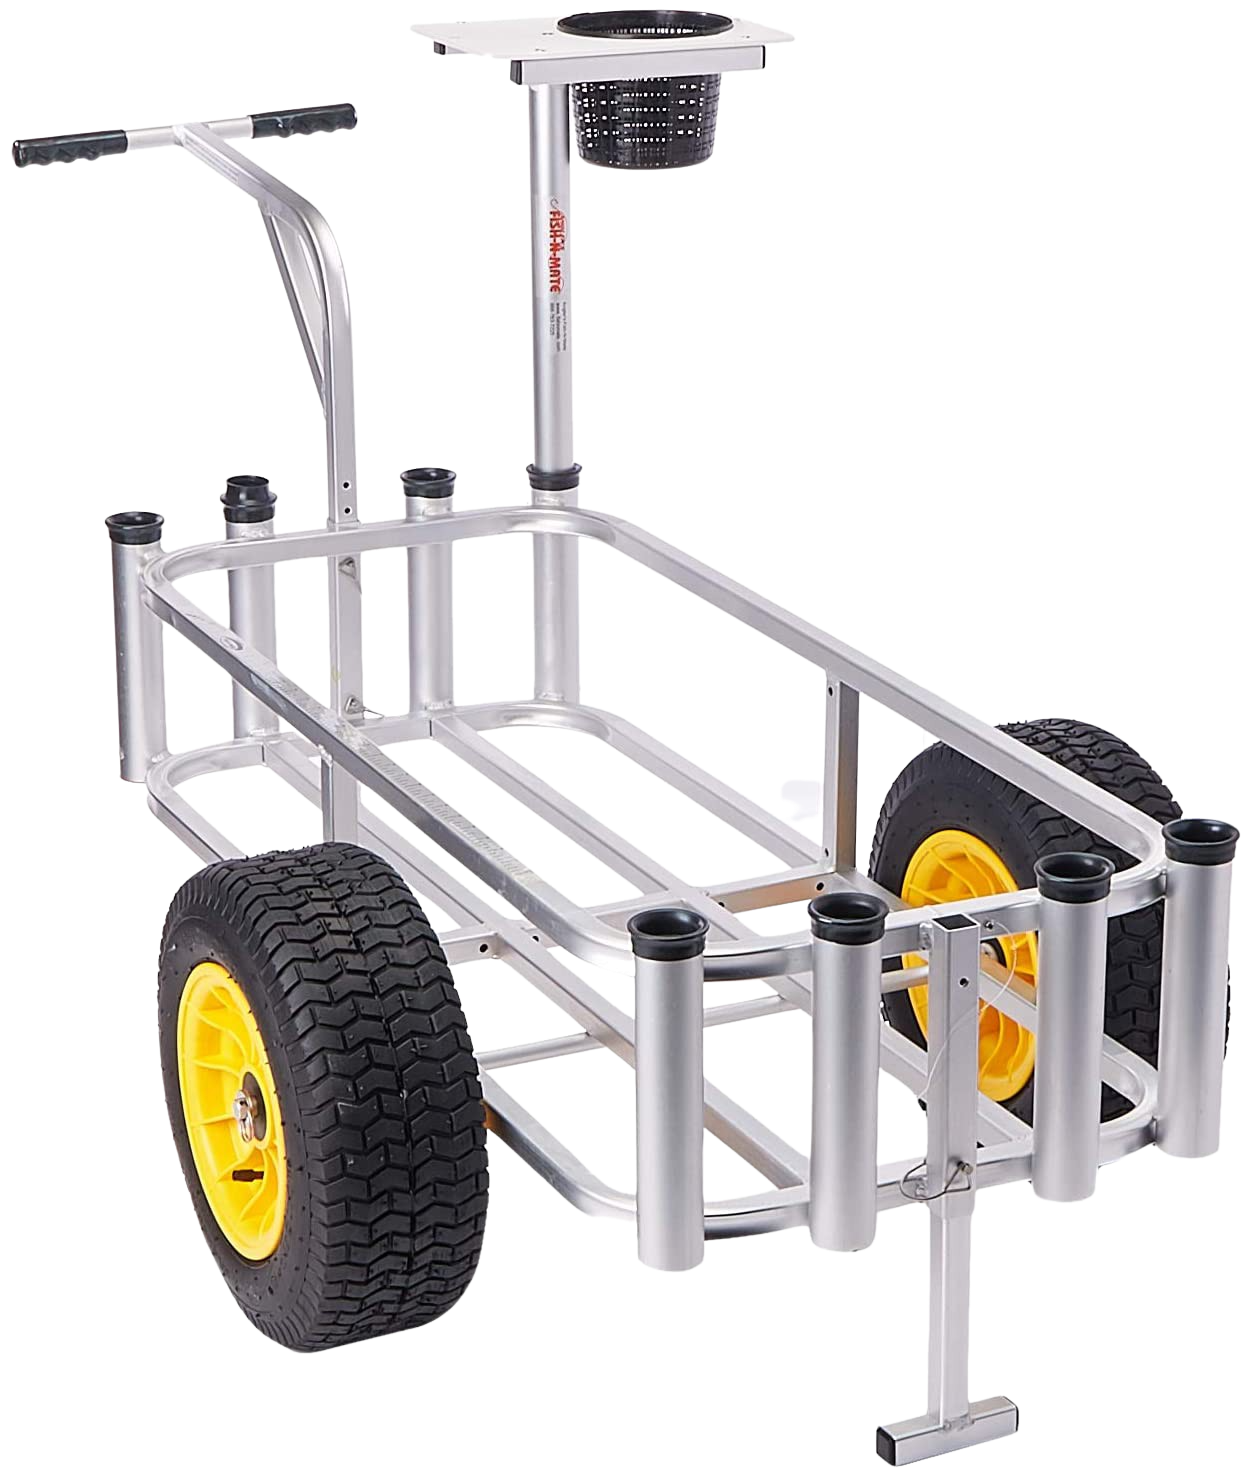 Angler's Fish-N-Mate 143 Pier Cart with Cutting Board and Bait